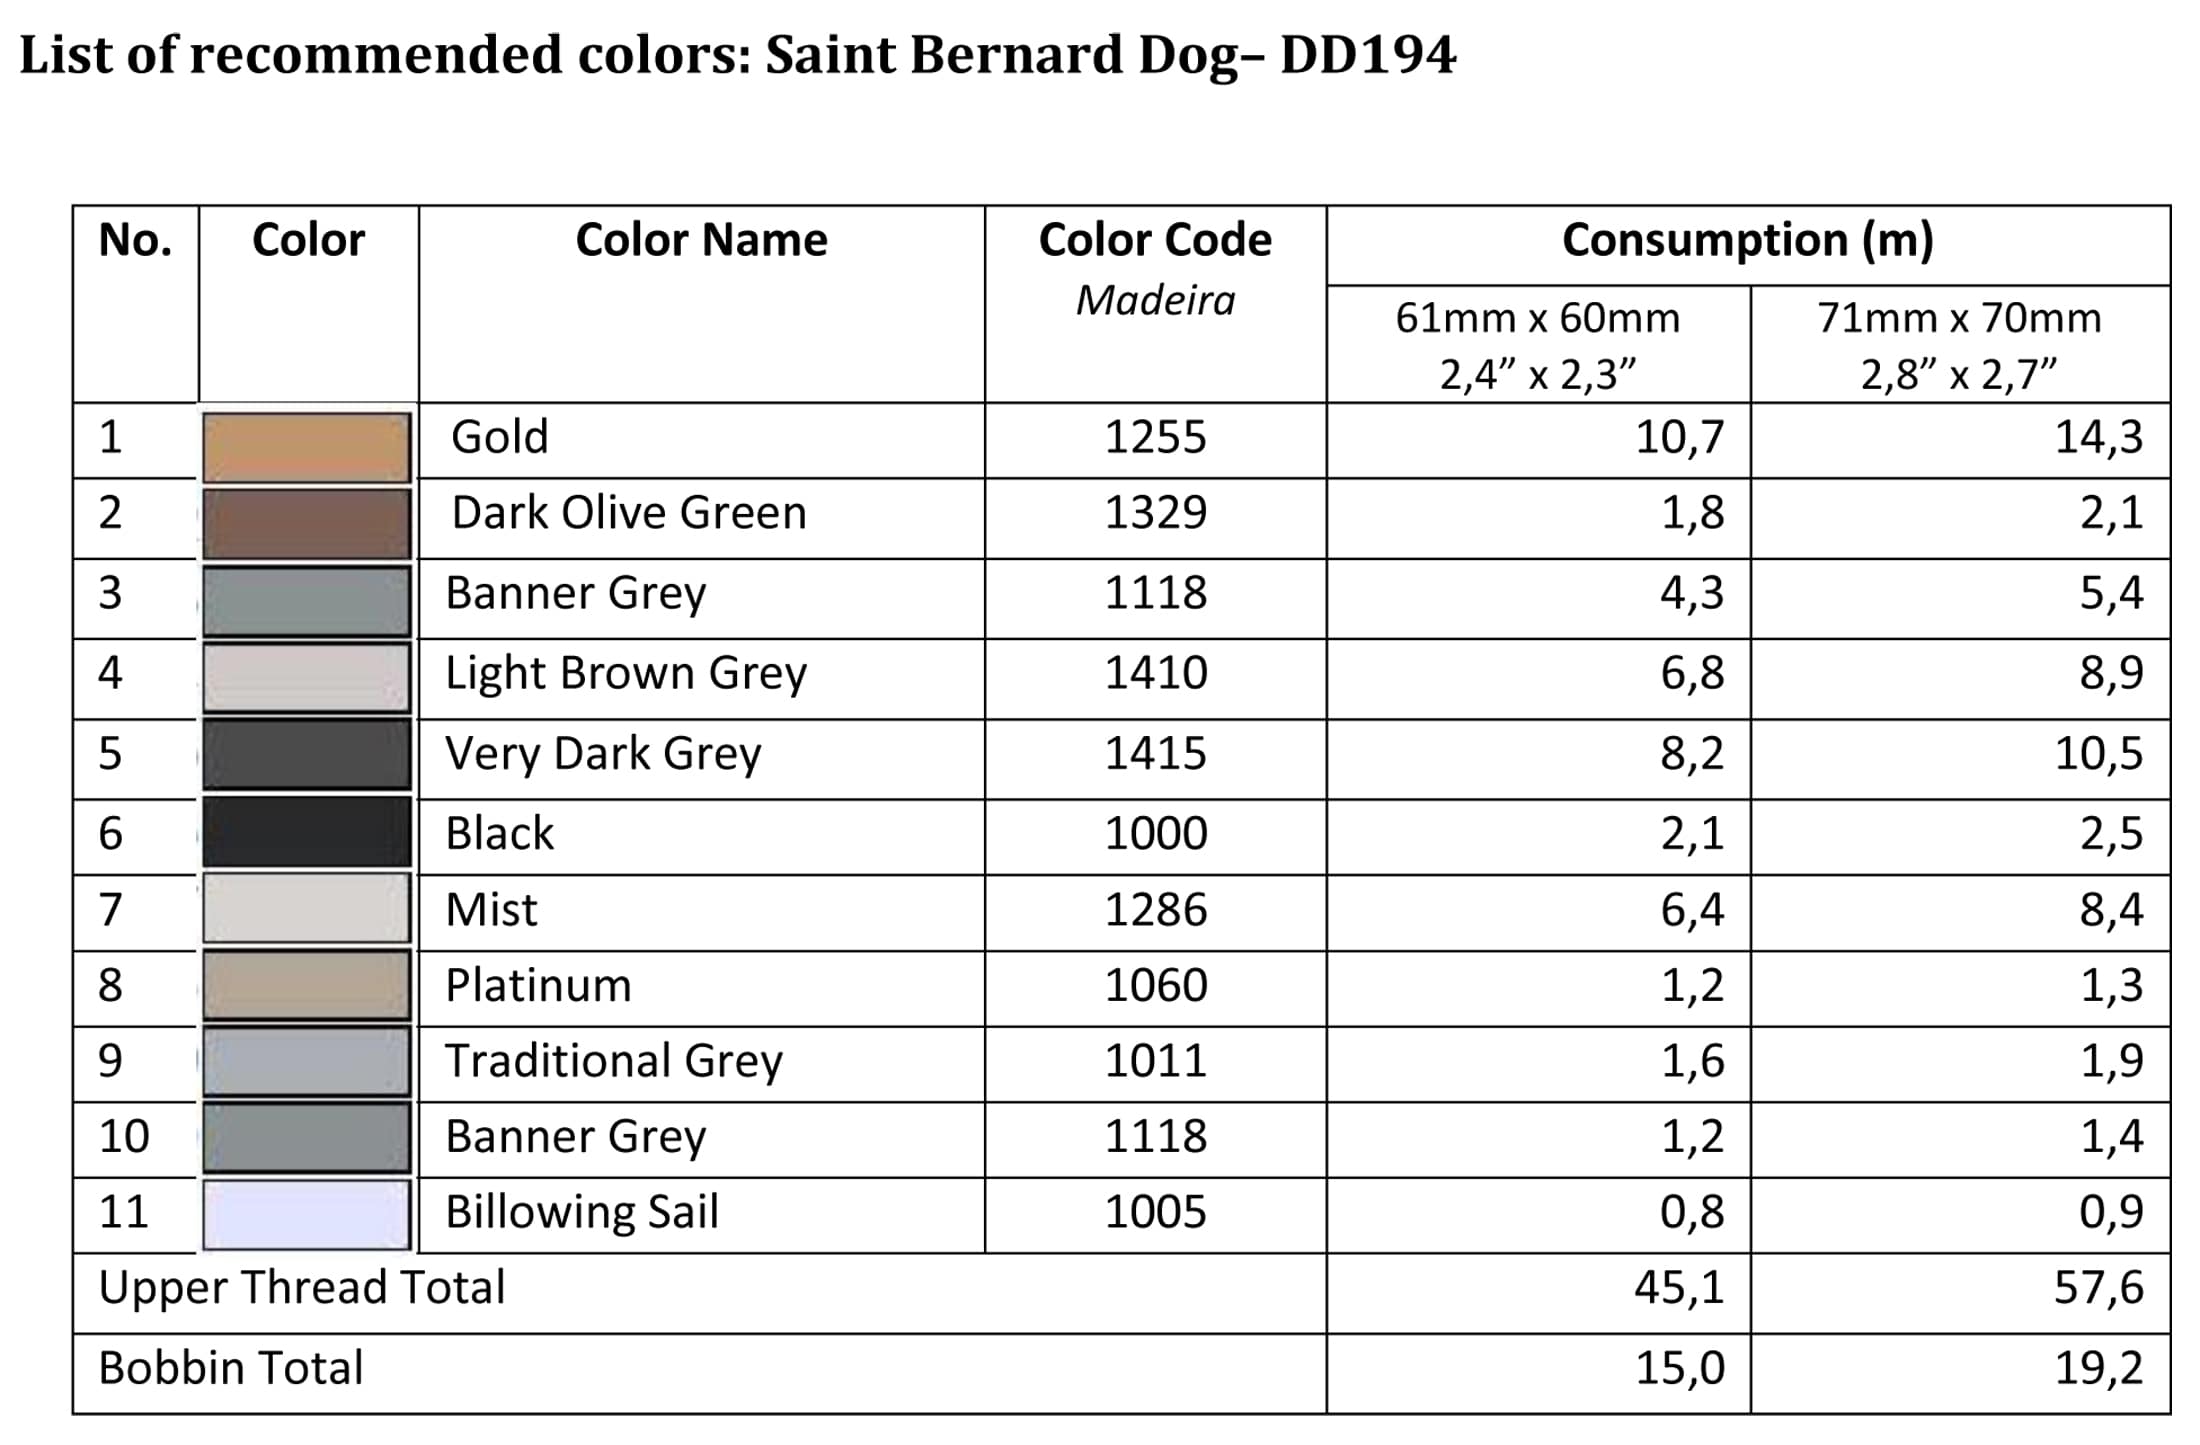 List of recommended colors - DD194